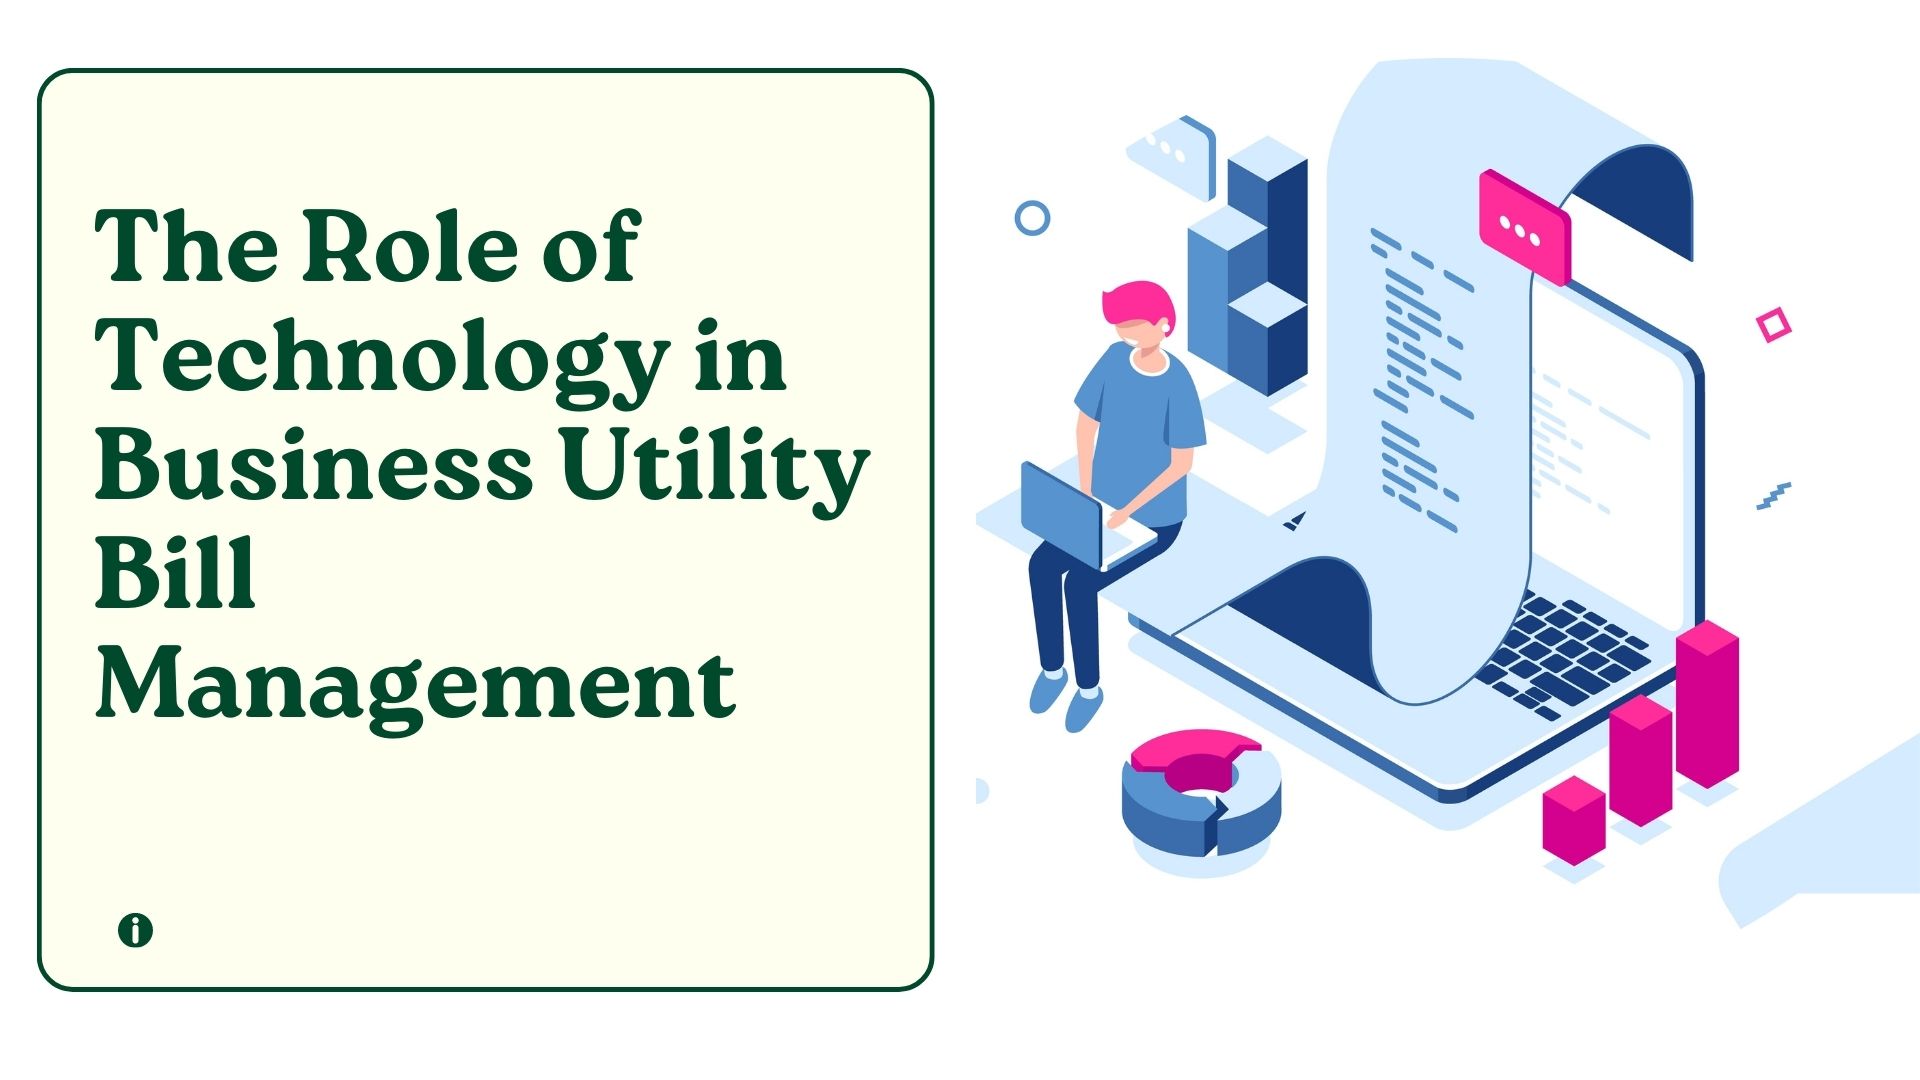 The Role of Technology in Business Utility Bill Management